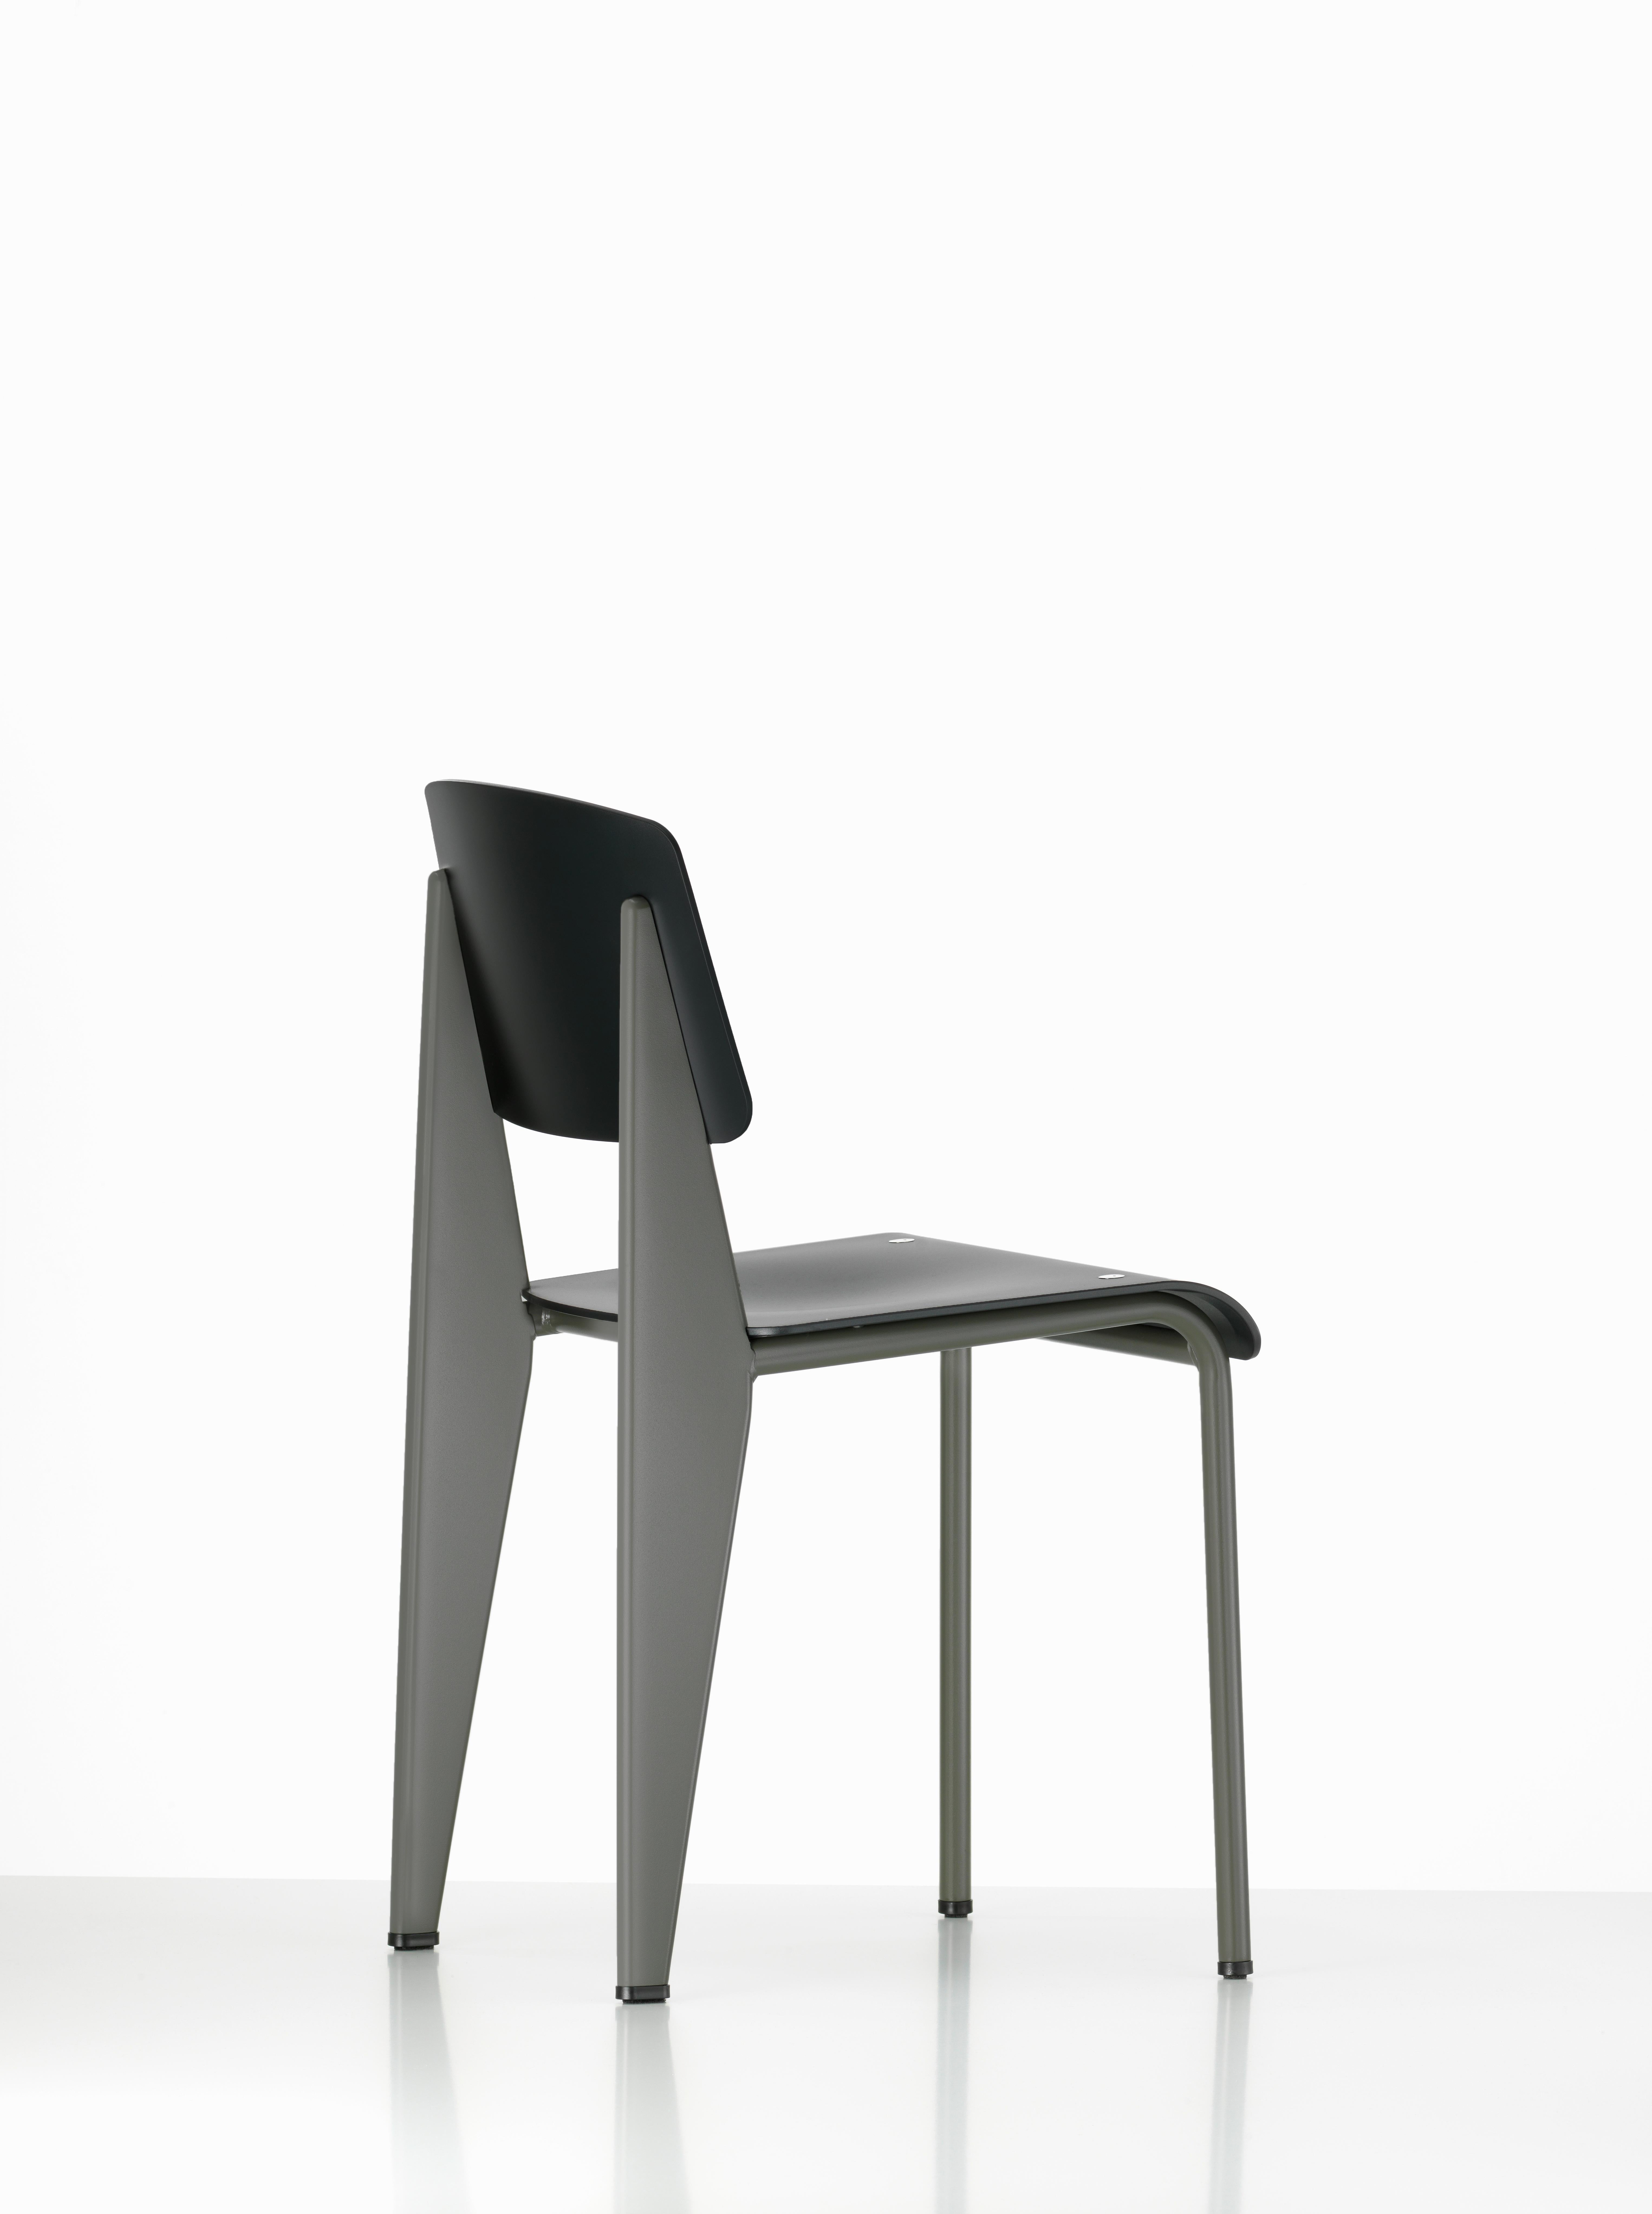 These items are currently only available in the United States.

Made of high quality plastic, the seat shell and backrest of the Standard SP (Siège en Plastique) chair by Jean Prouvé are available in a range of contemporary colors. This gives the